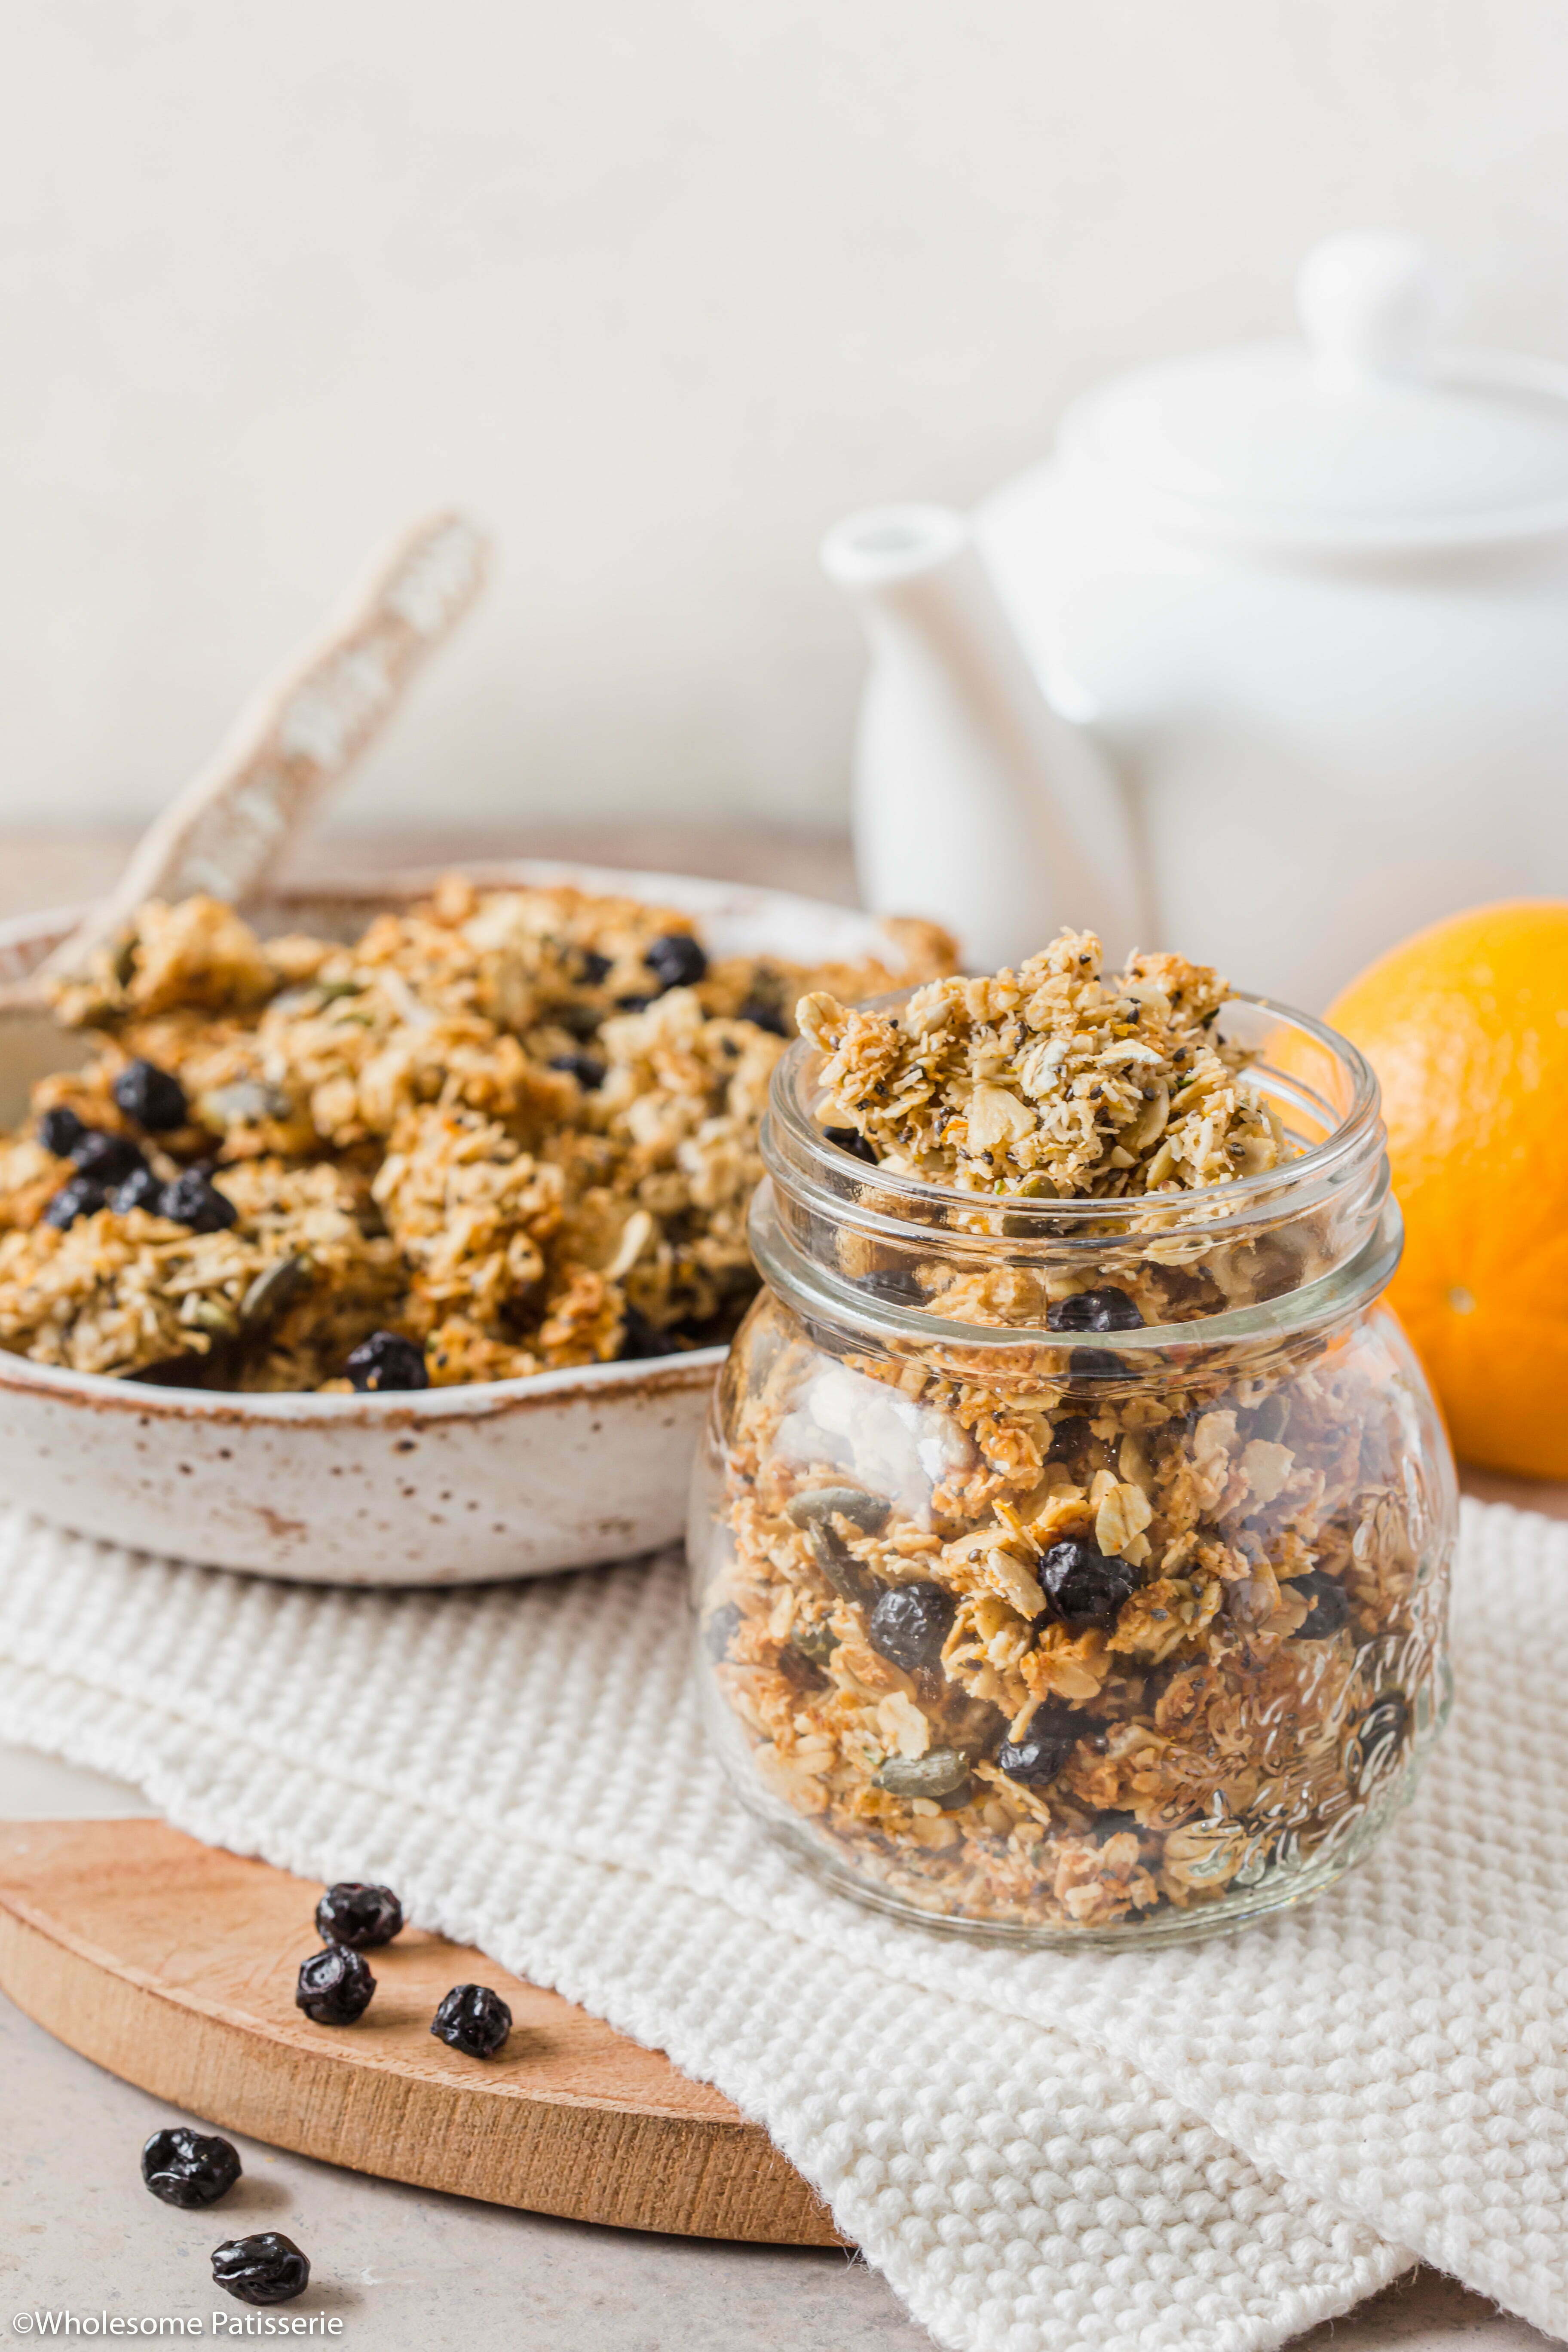 Orange & Blueberry Seeded Granola! Wholesome and flavourful orange infused homemade granola. Loaded with seeds and free from nuts! Turns out chunky which is perfect to top your yoghurt and berries or serve with milk and enjoy!